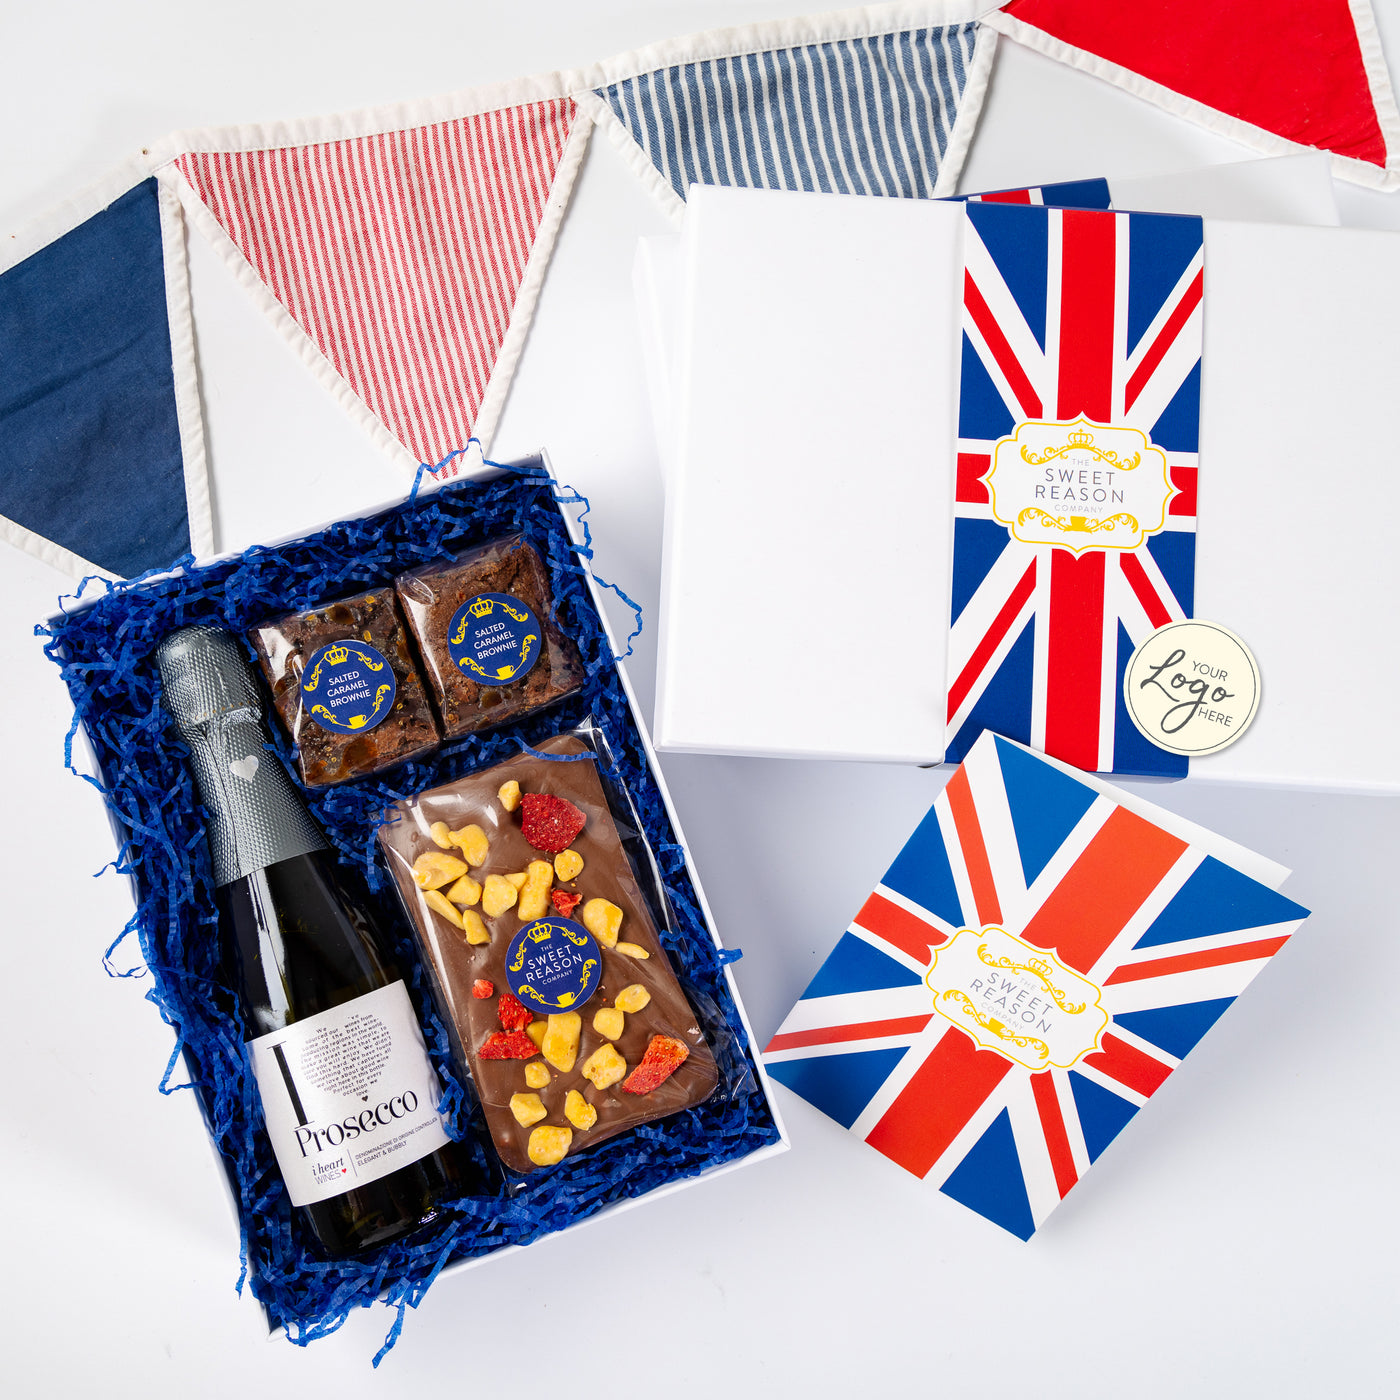 Branded & personalised 'British' Chocolate Slab, Brownies and Prosecco